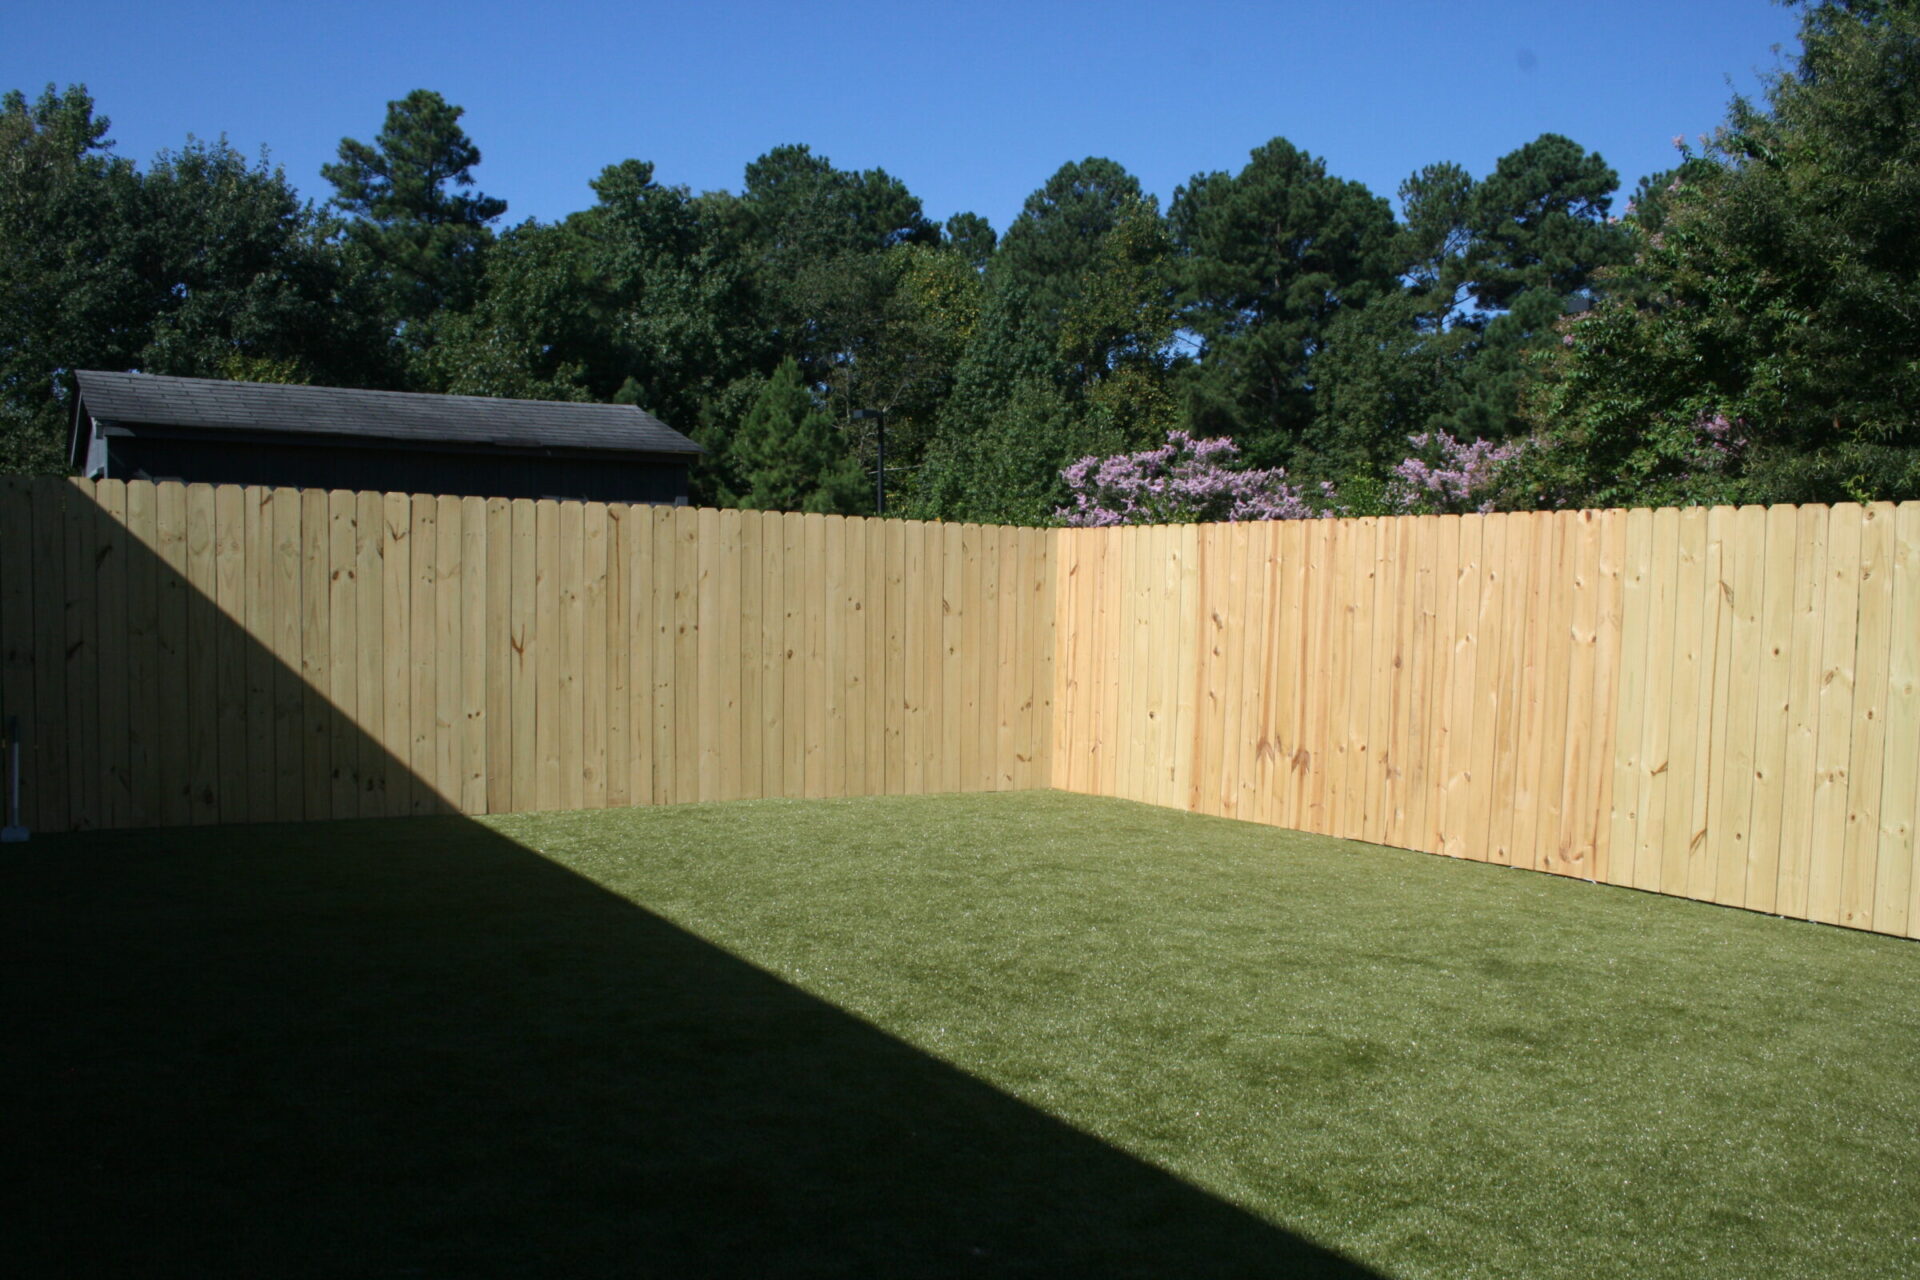 This image shows a neat, well-maintained backyard with a wooden fence, artificial grass, and trees peeking over the fence under a clear blue sky.